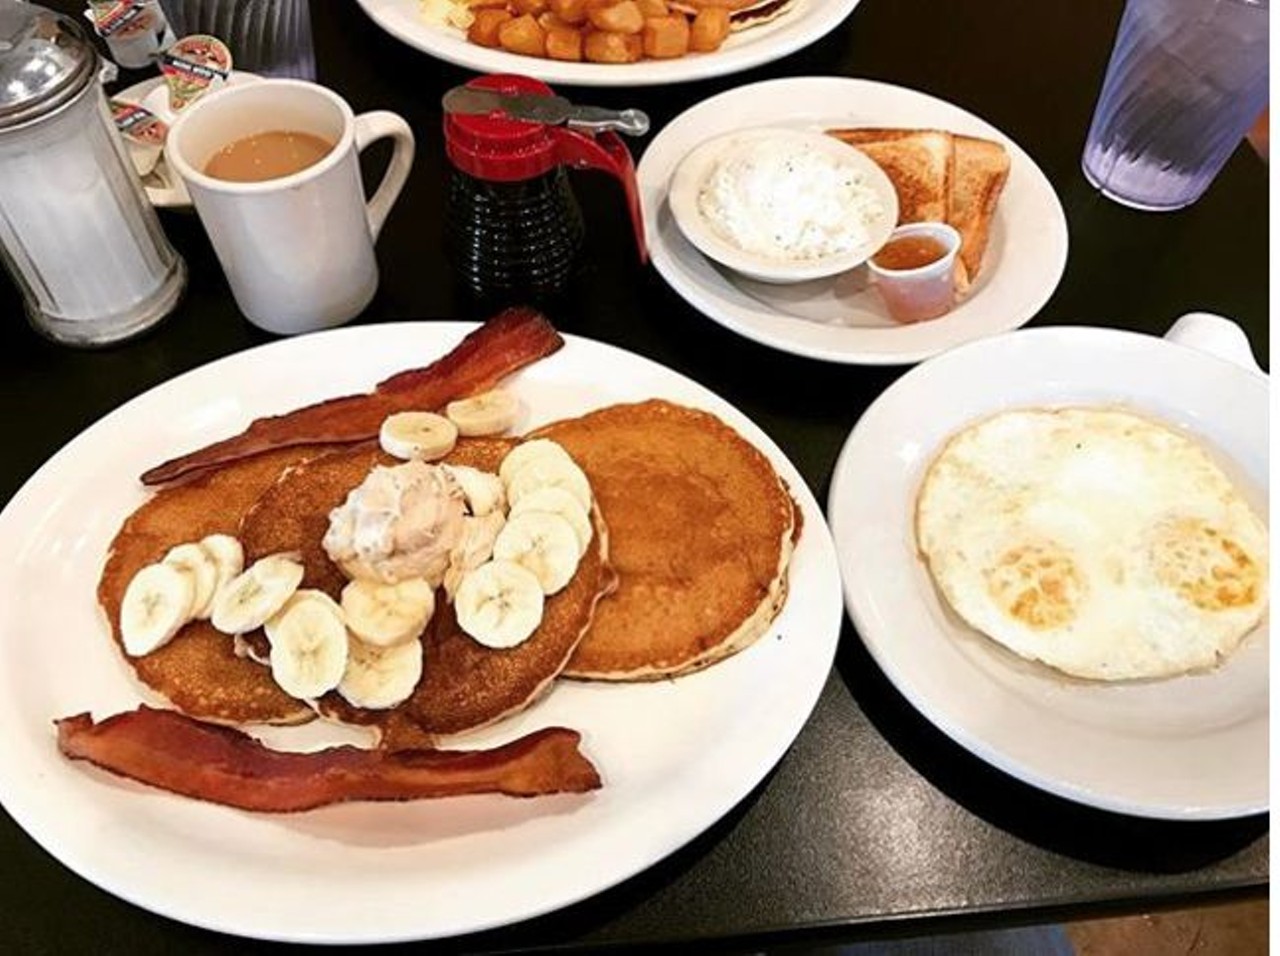 Courtyard Cafe
7600 Eckhert Rd., (210) 370-3779
Check out this low-key breakfast and lunch spot for some delicious pancakes, burgers and just about ever other diner food you love. 
Photo via Instagram,  lil.tru.dragon